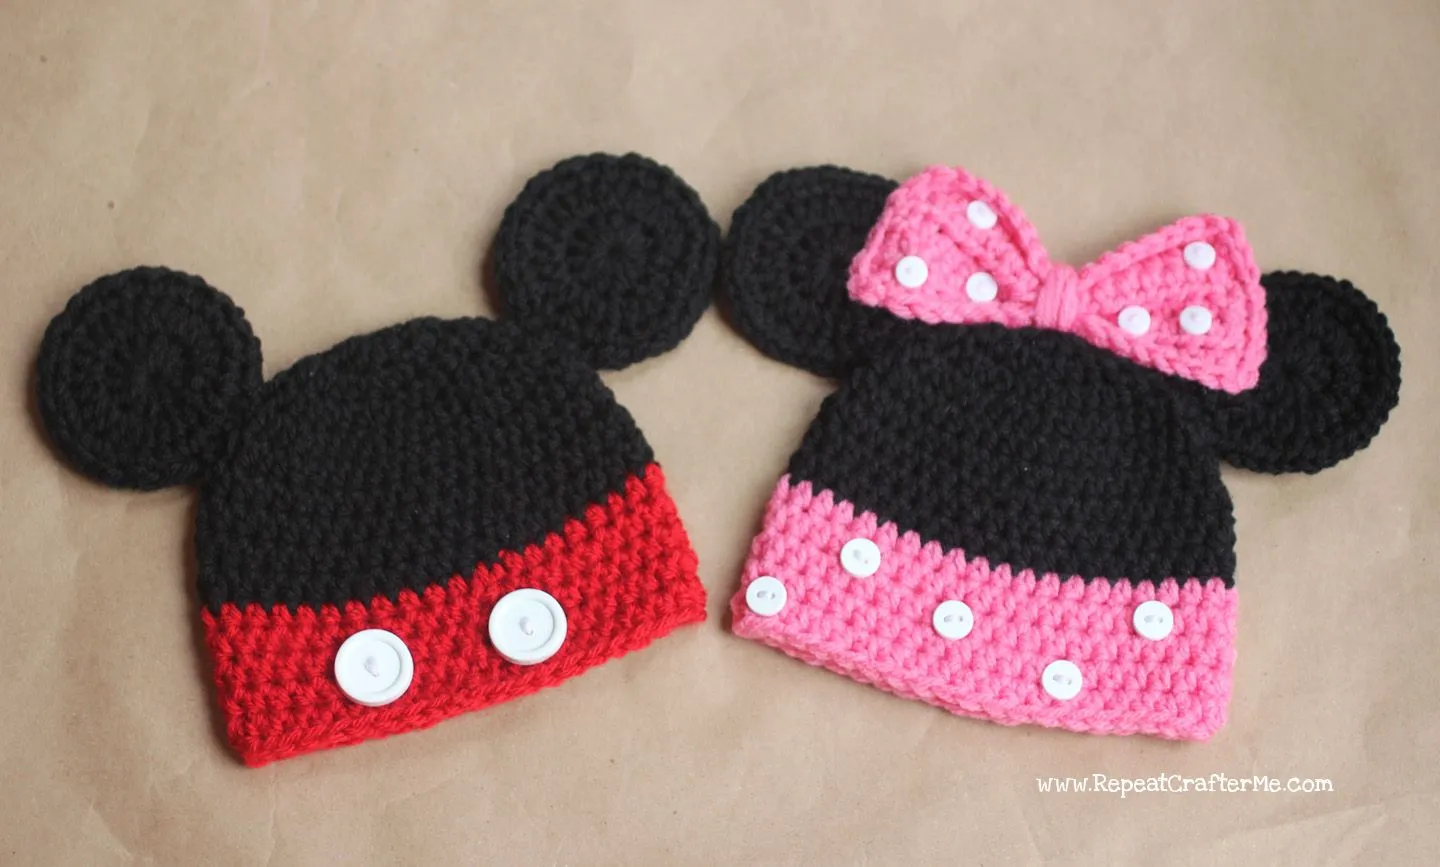 Repeat Crafter Me: Mickey and Minnie Mouse Crochet Hat Pattern